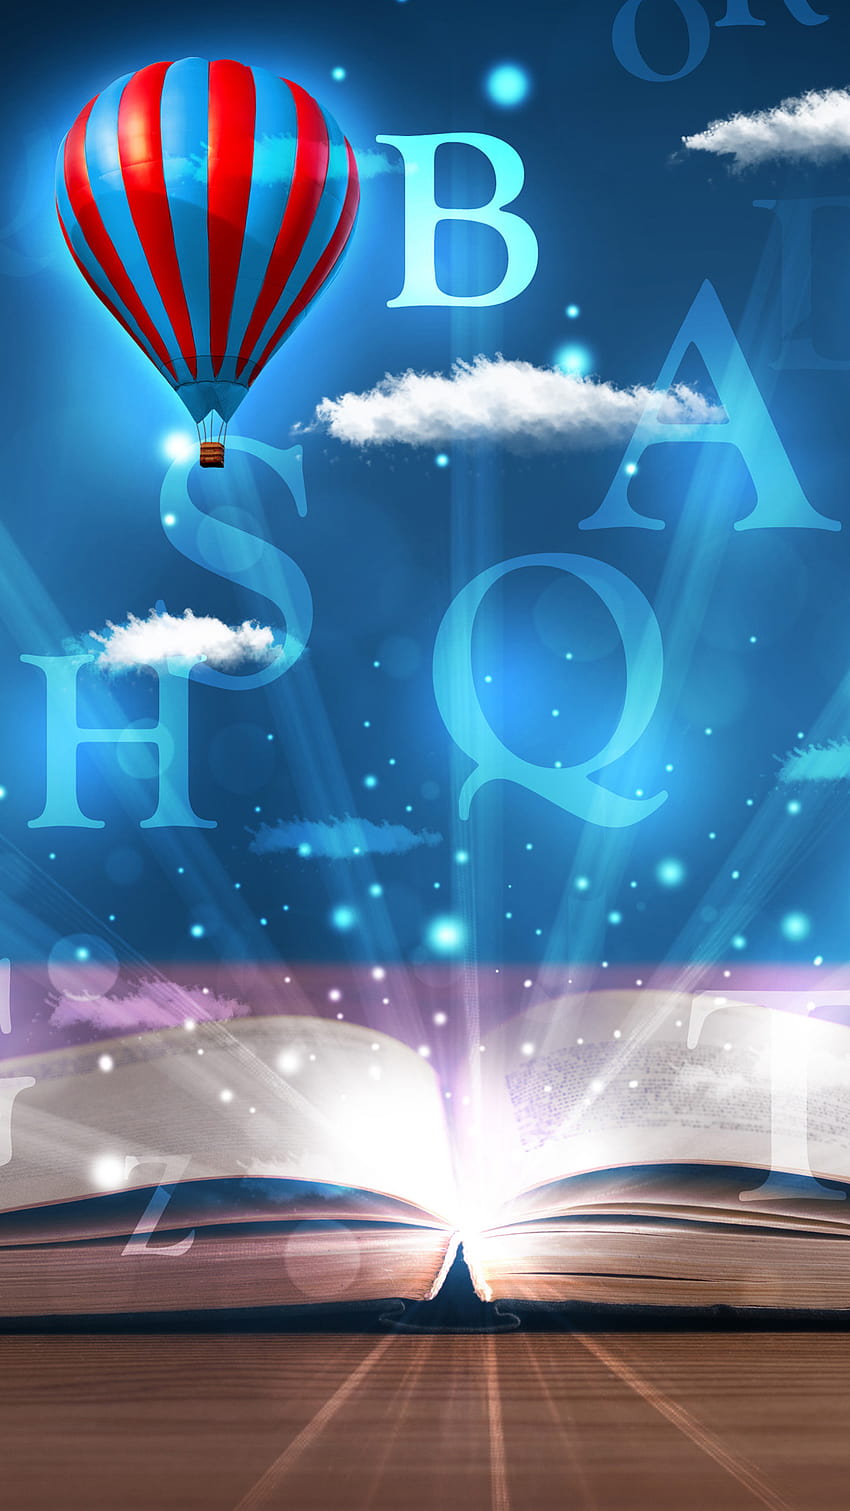 Open book with glowing fantasy abstract clouds and balloons Android, book fantasy android HD phone wallpaper